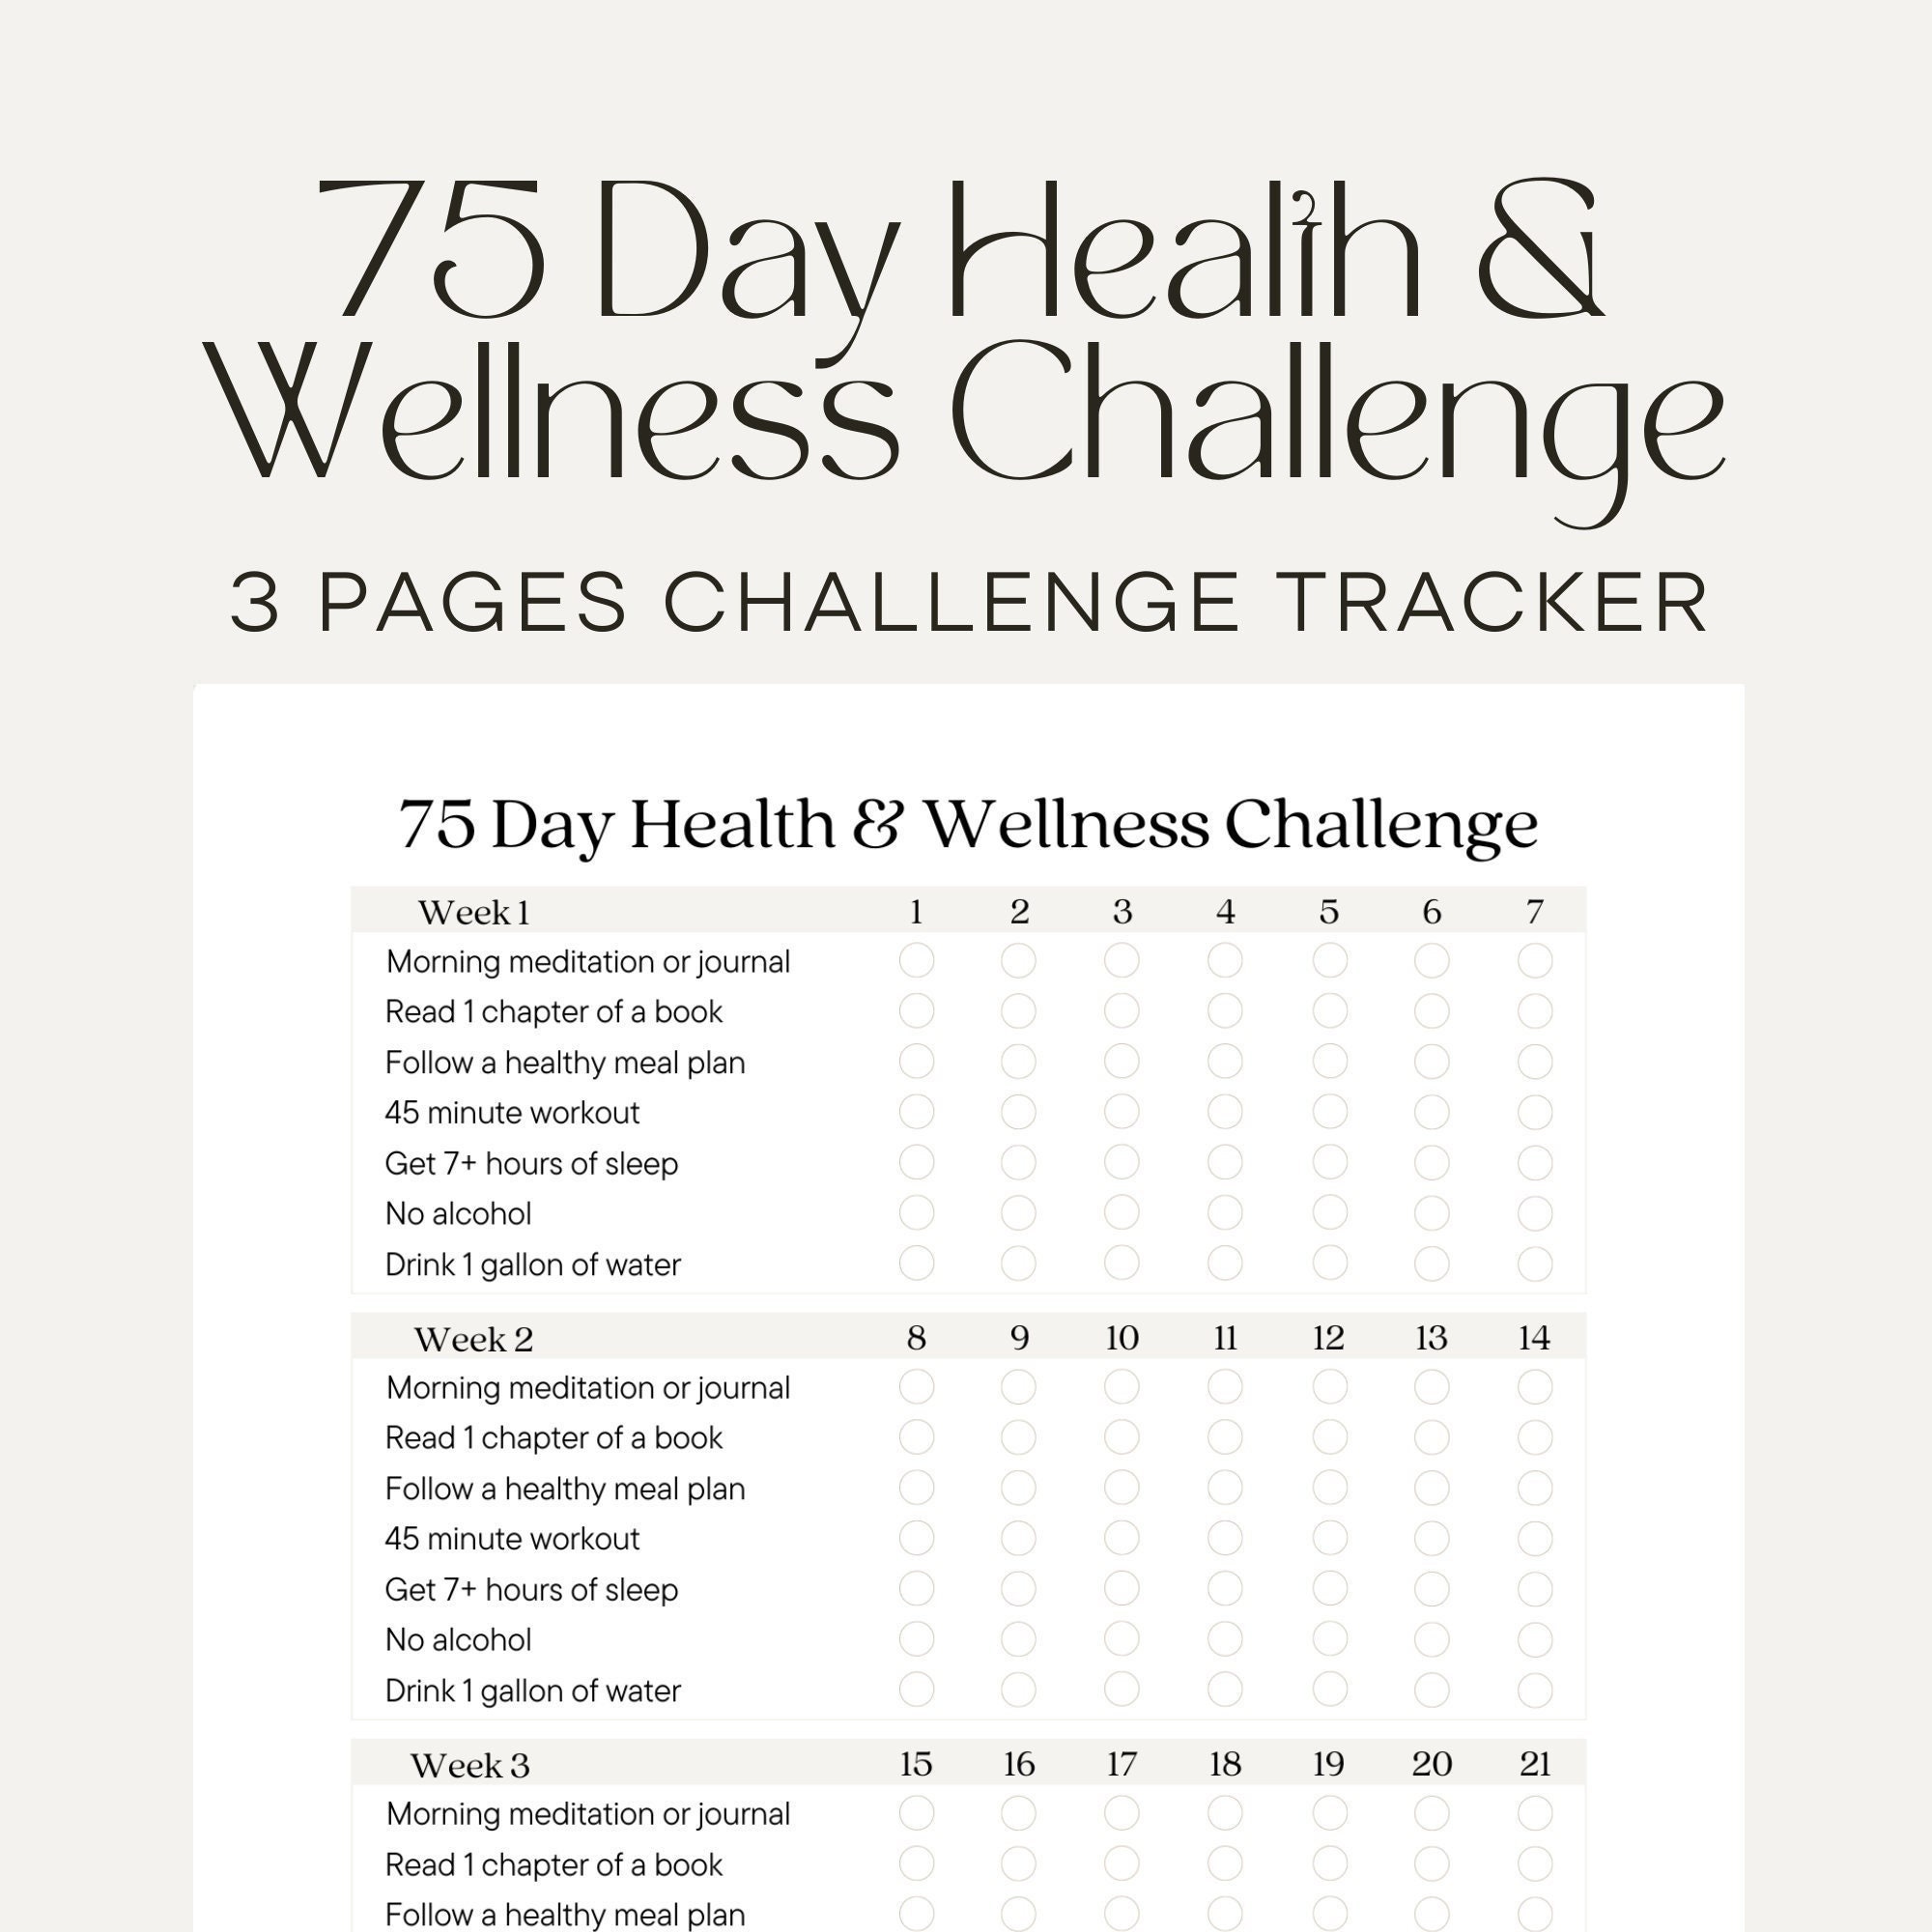 Sign Up Now for the “Unwrap Your Gifts” Email Wellness Challenge